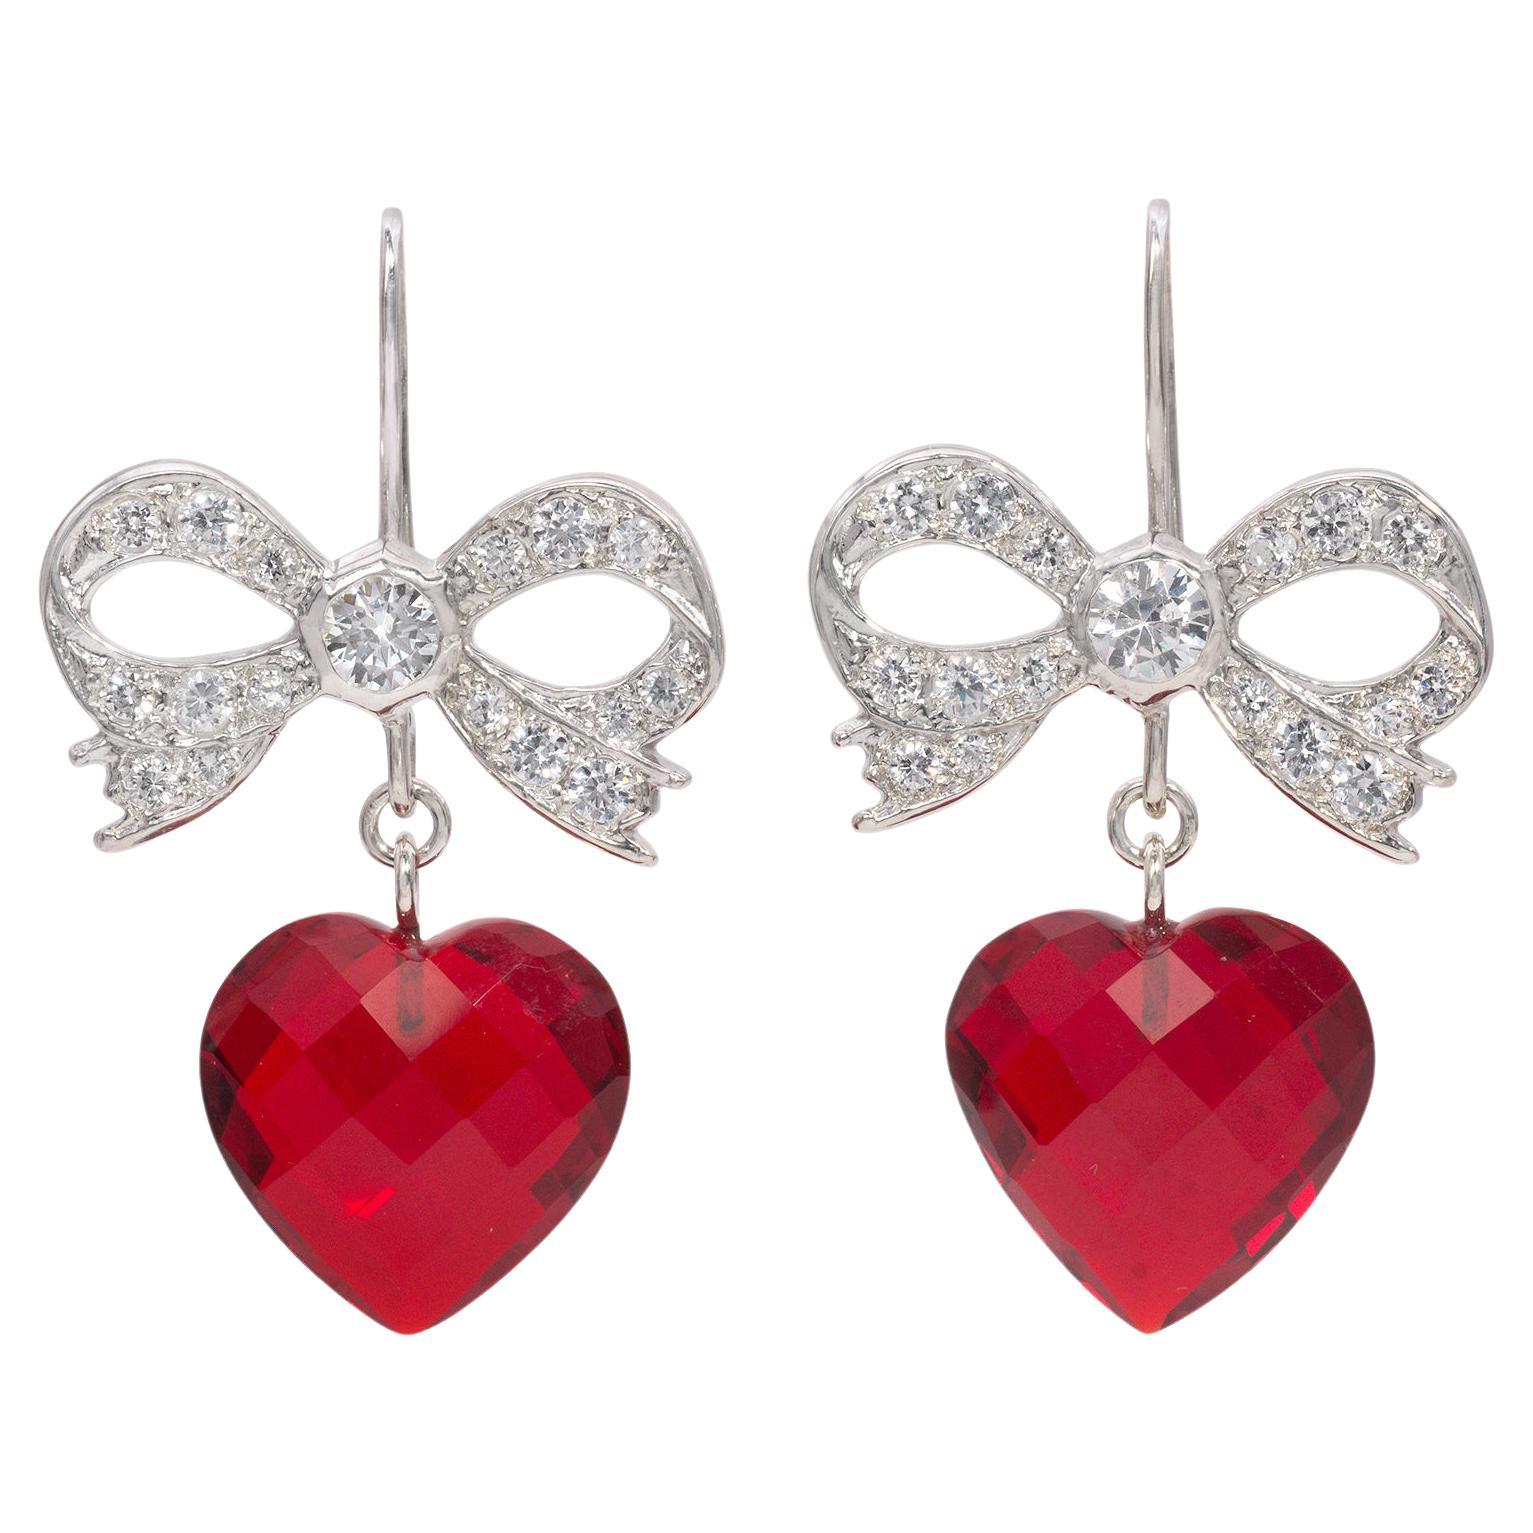        Swarovski Crystal Bow and Heart Earrings                     For Sale